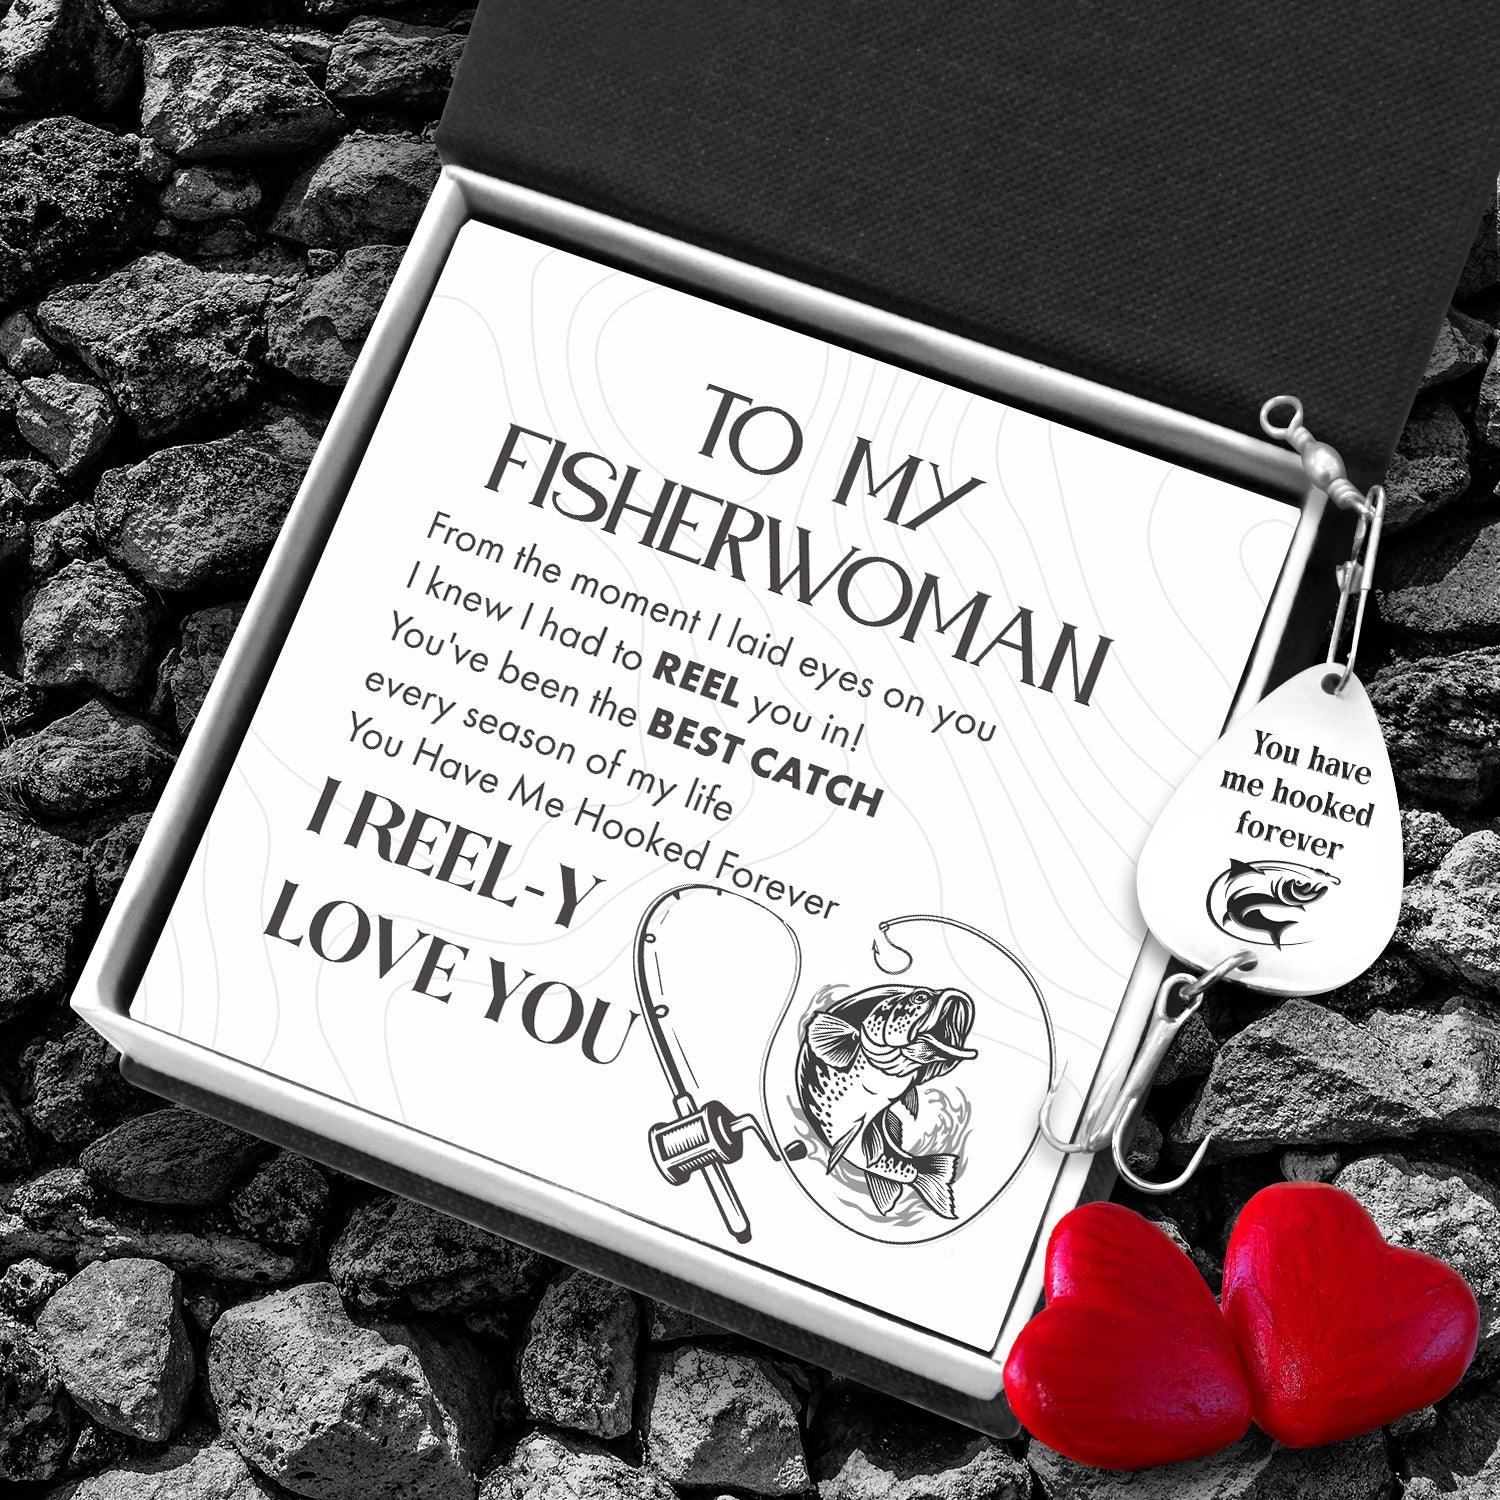 Engraved Fishing Hook - To My Fisherwoman - You Have Me Hooked Forever - Augfa13008 - Gifts Holder